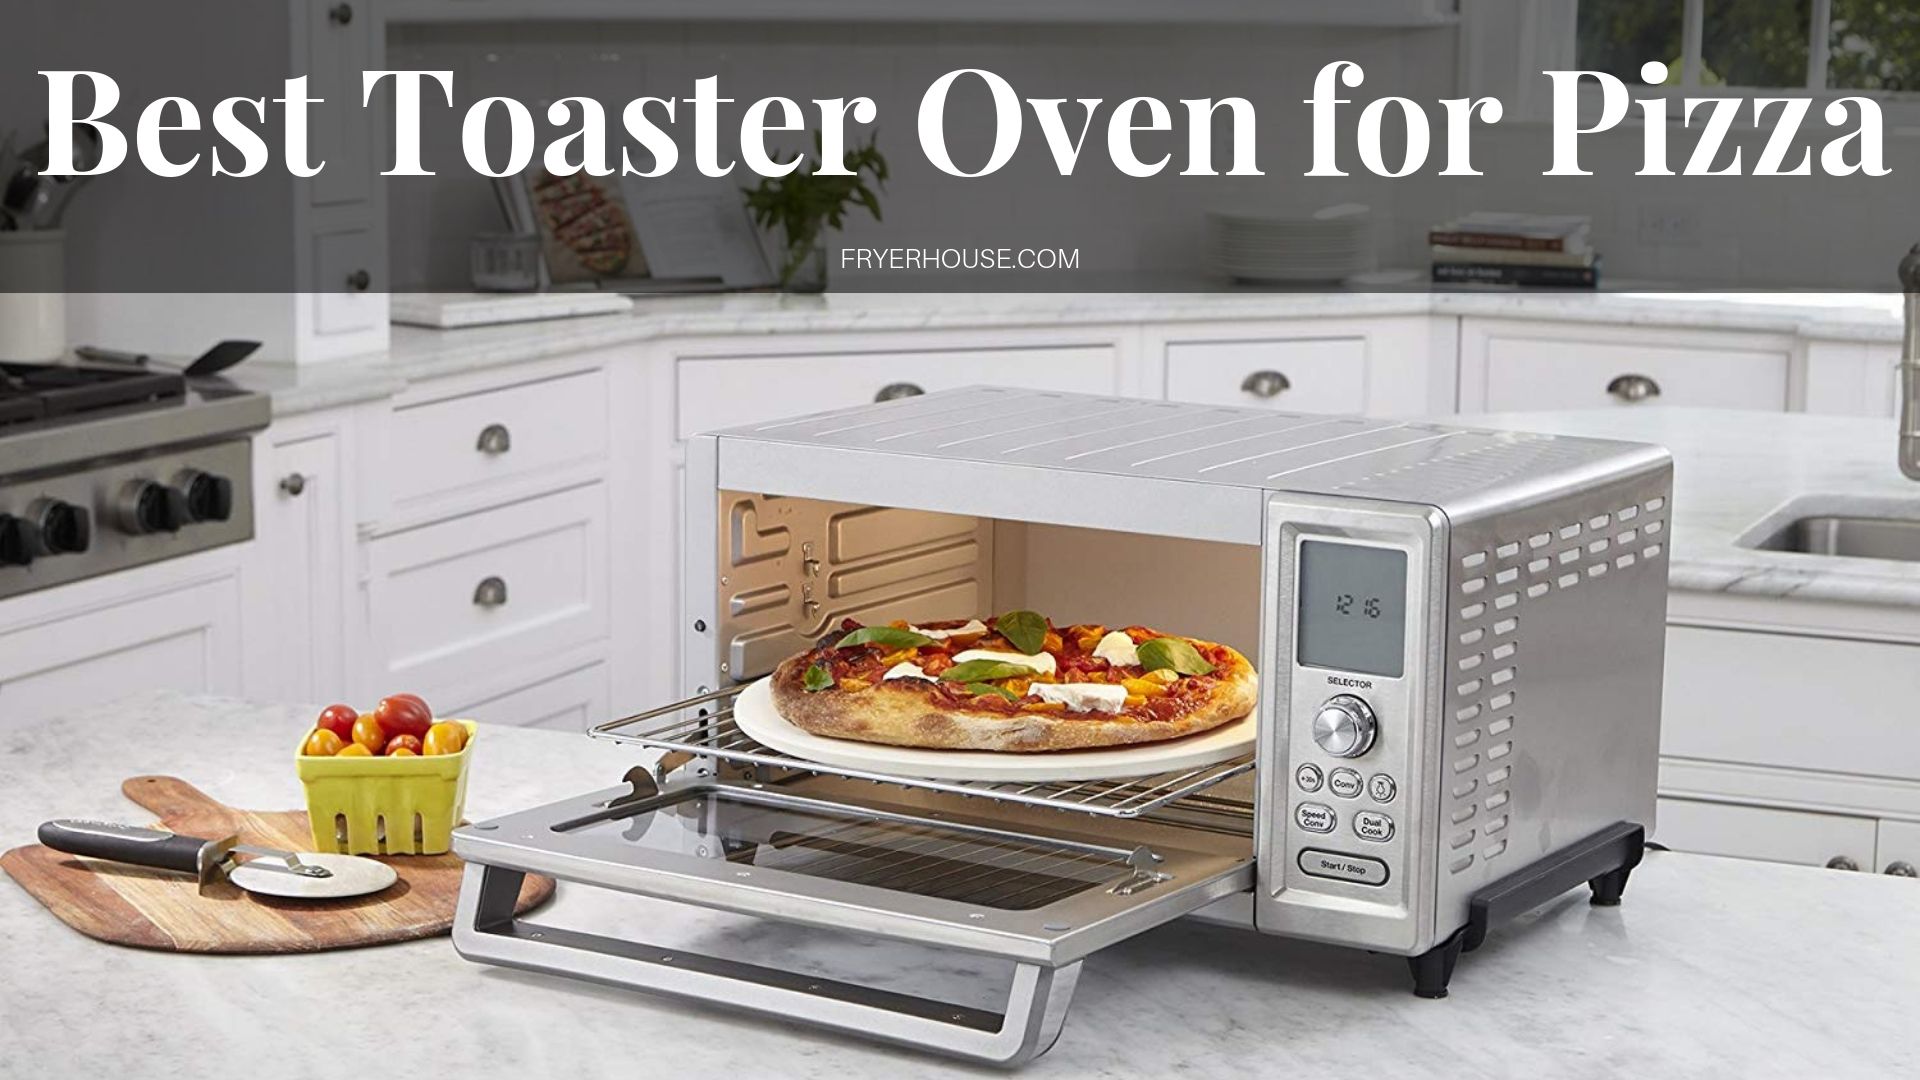 10 Best Toaster Oven For Pizza 2020 Expert Reviews